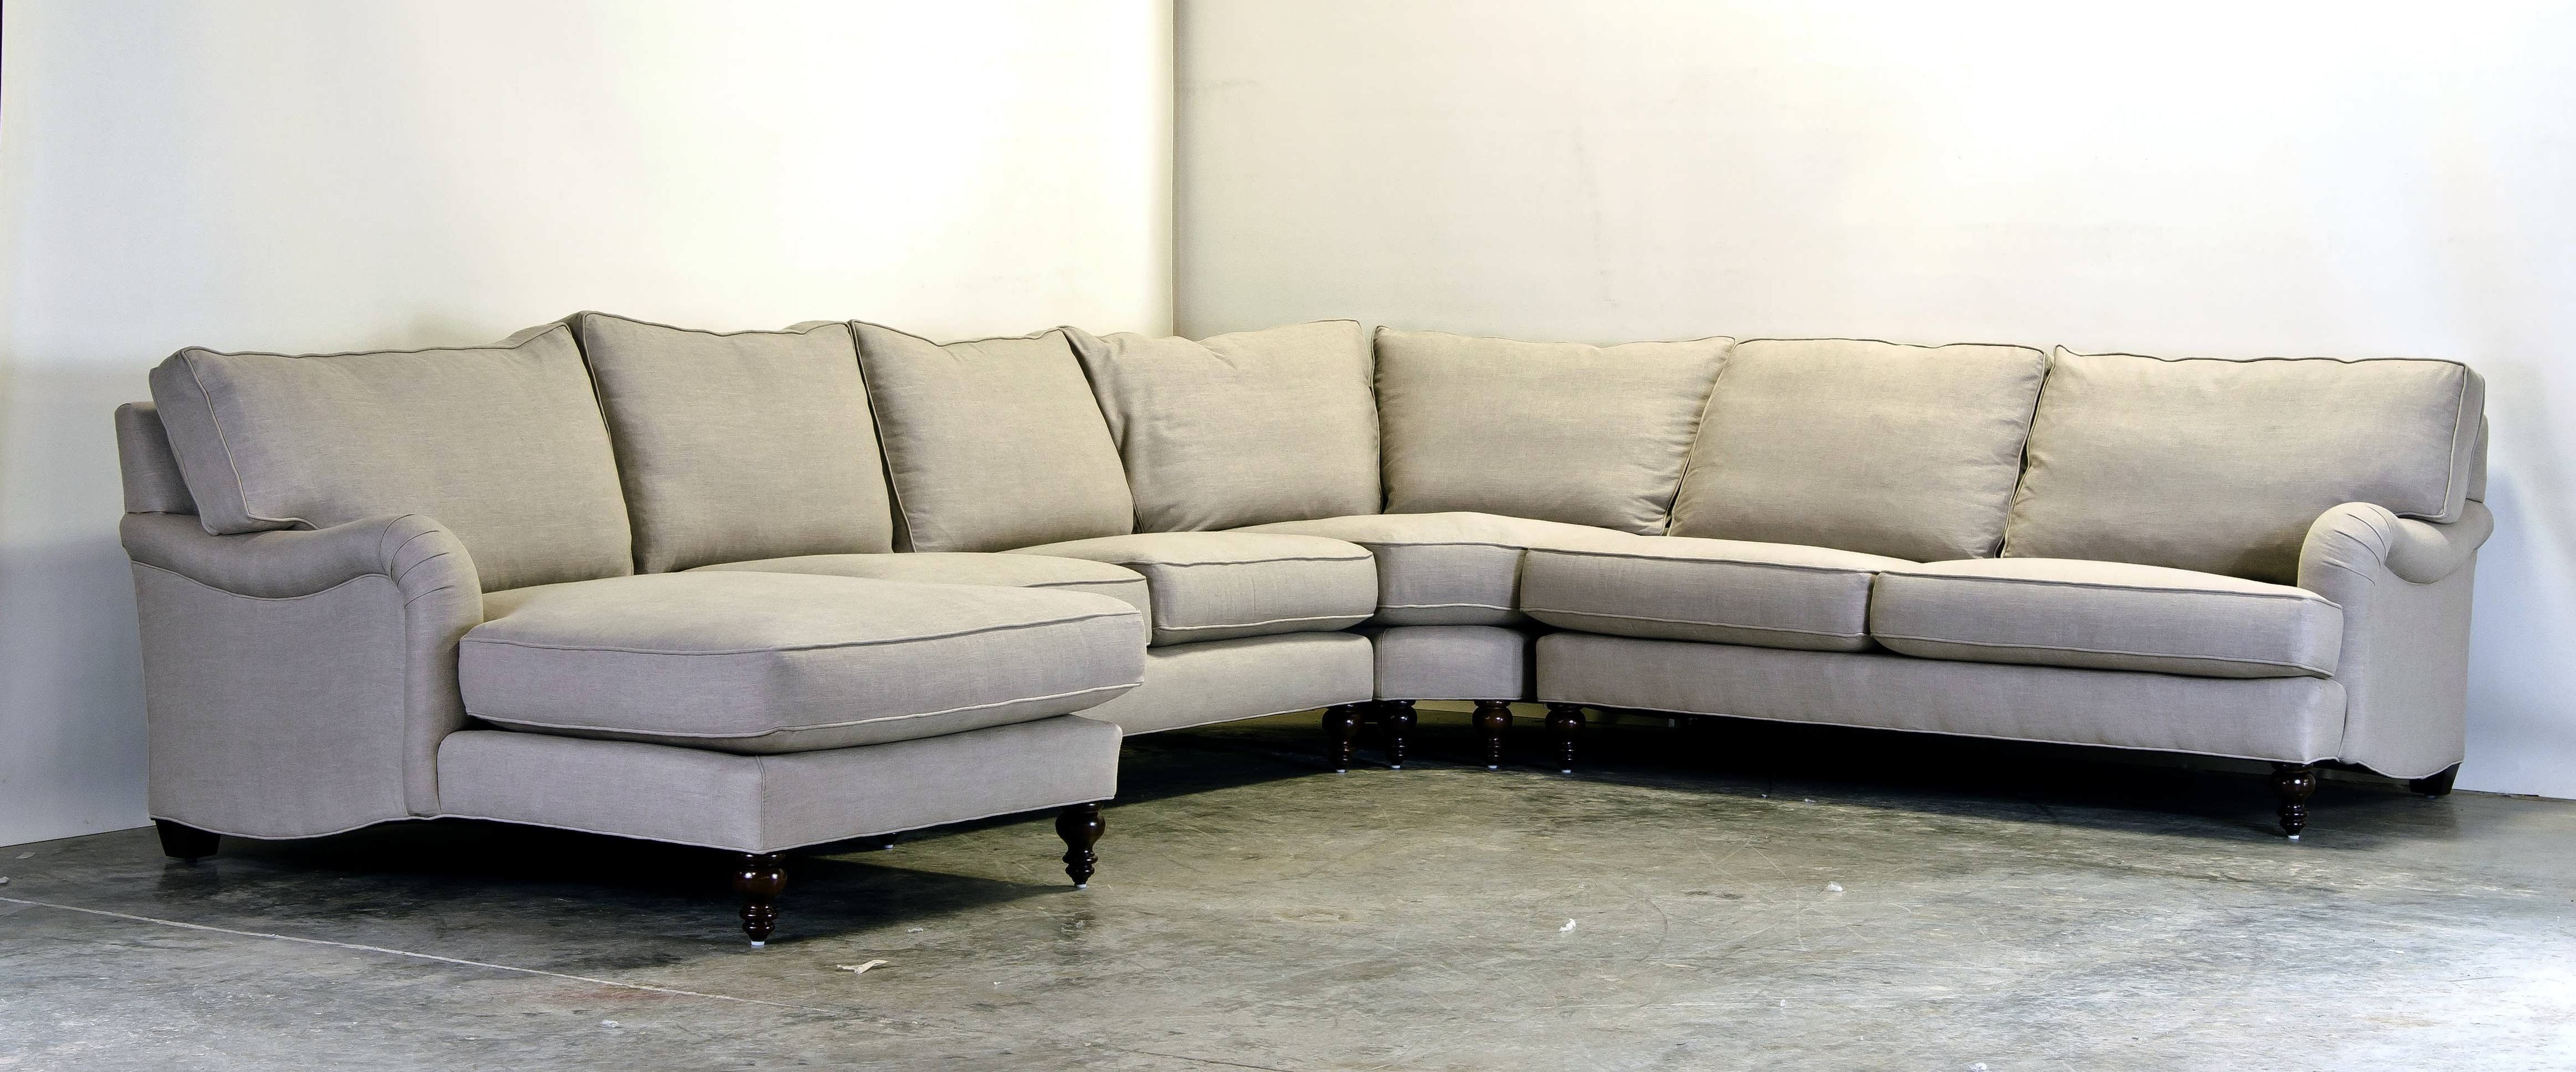 Sofa : Mini Sectional Couch Sofa Couch Sectional Furniture Small Inside 2018 Small Couches With Chaise (Photo 9 of 15)